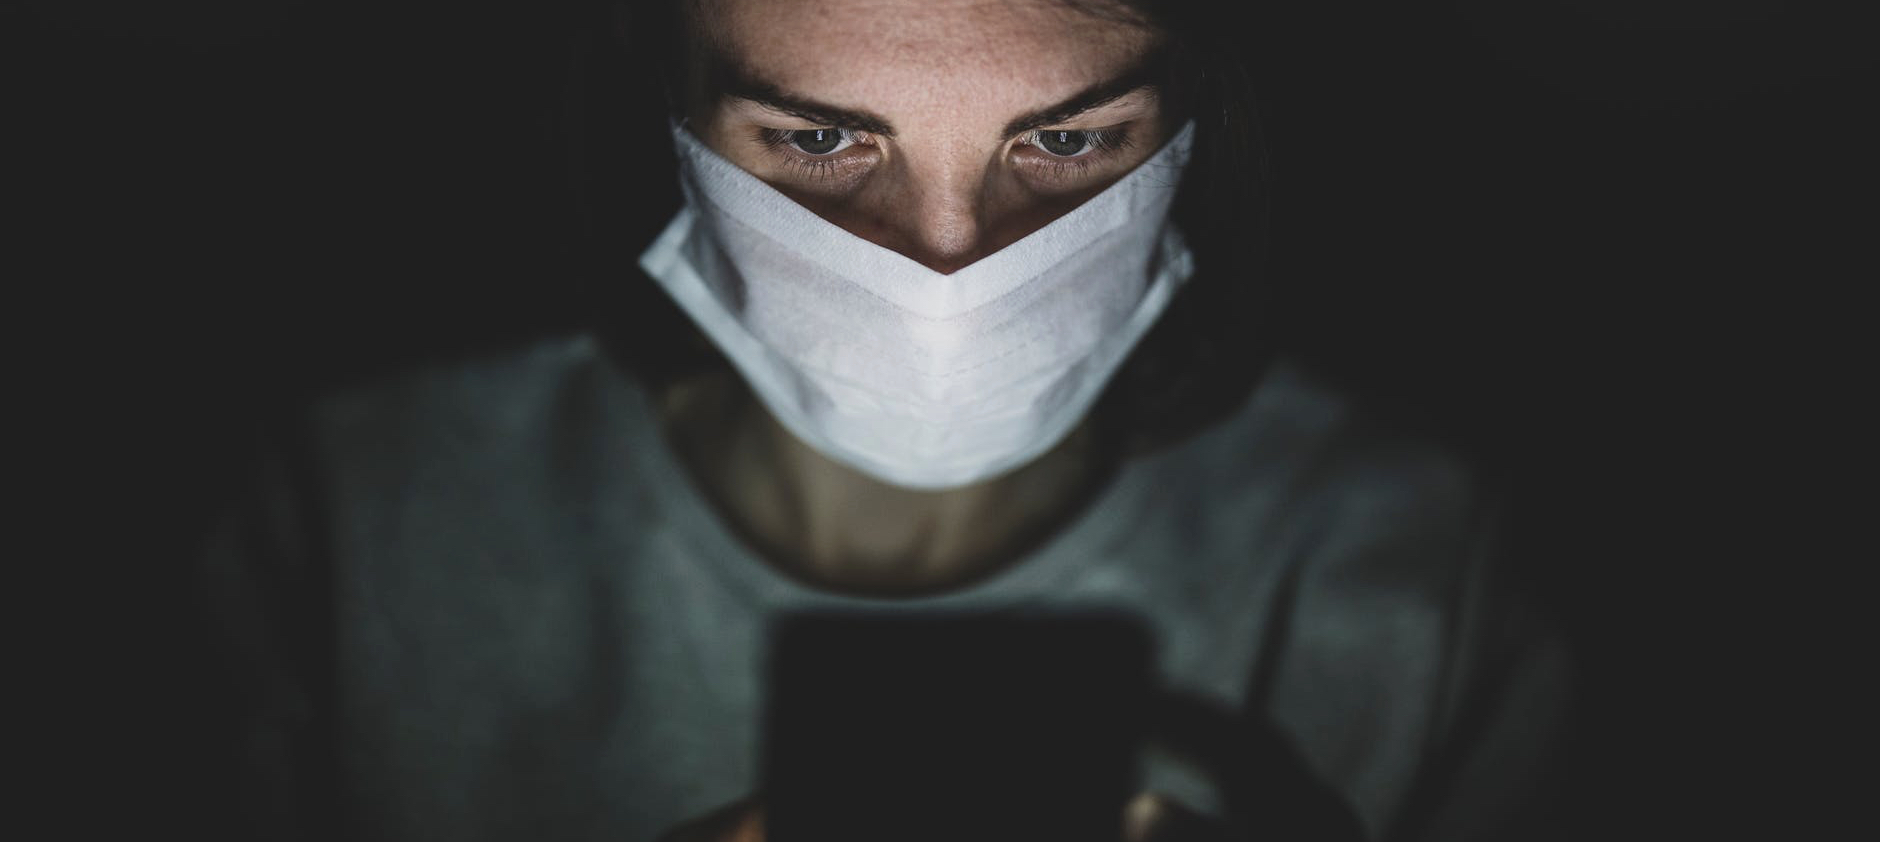 man wearing face mask using his phone in the dark